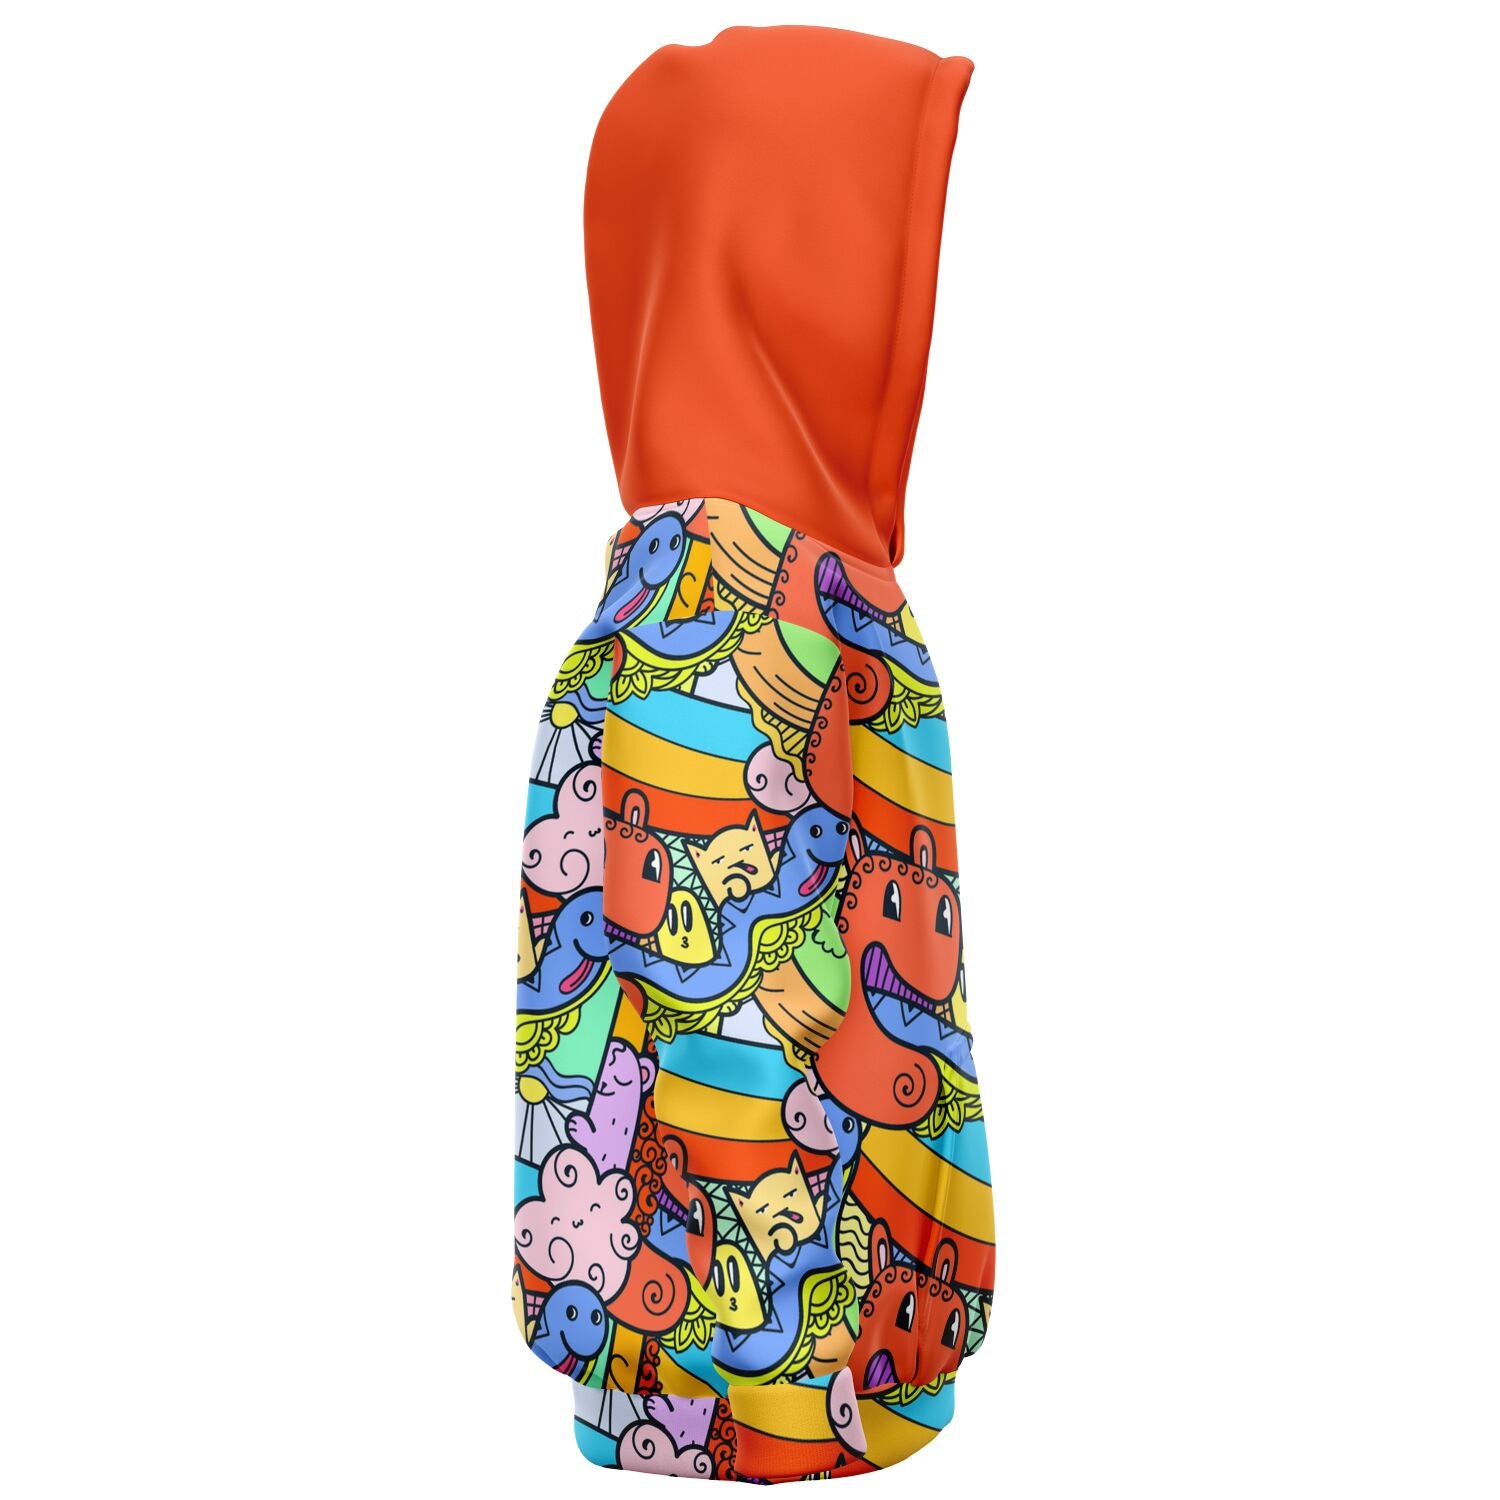 Naughty Rainbow Worm Doodle Hoodie for Kids - Sport Finesse